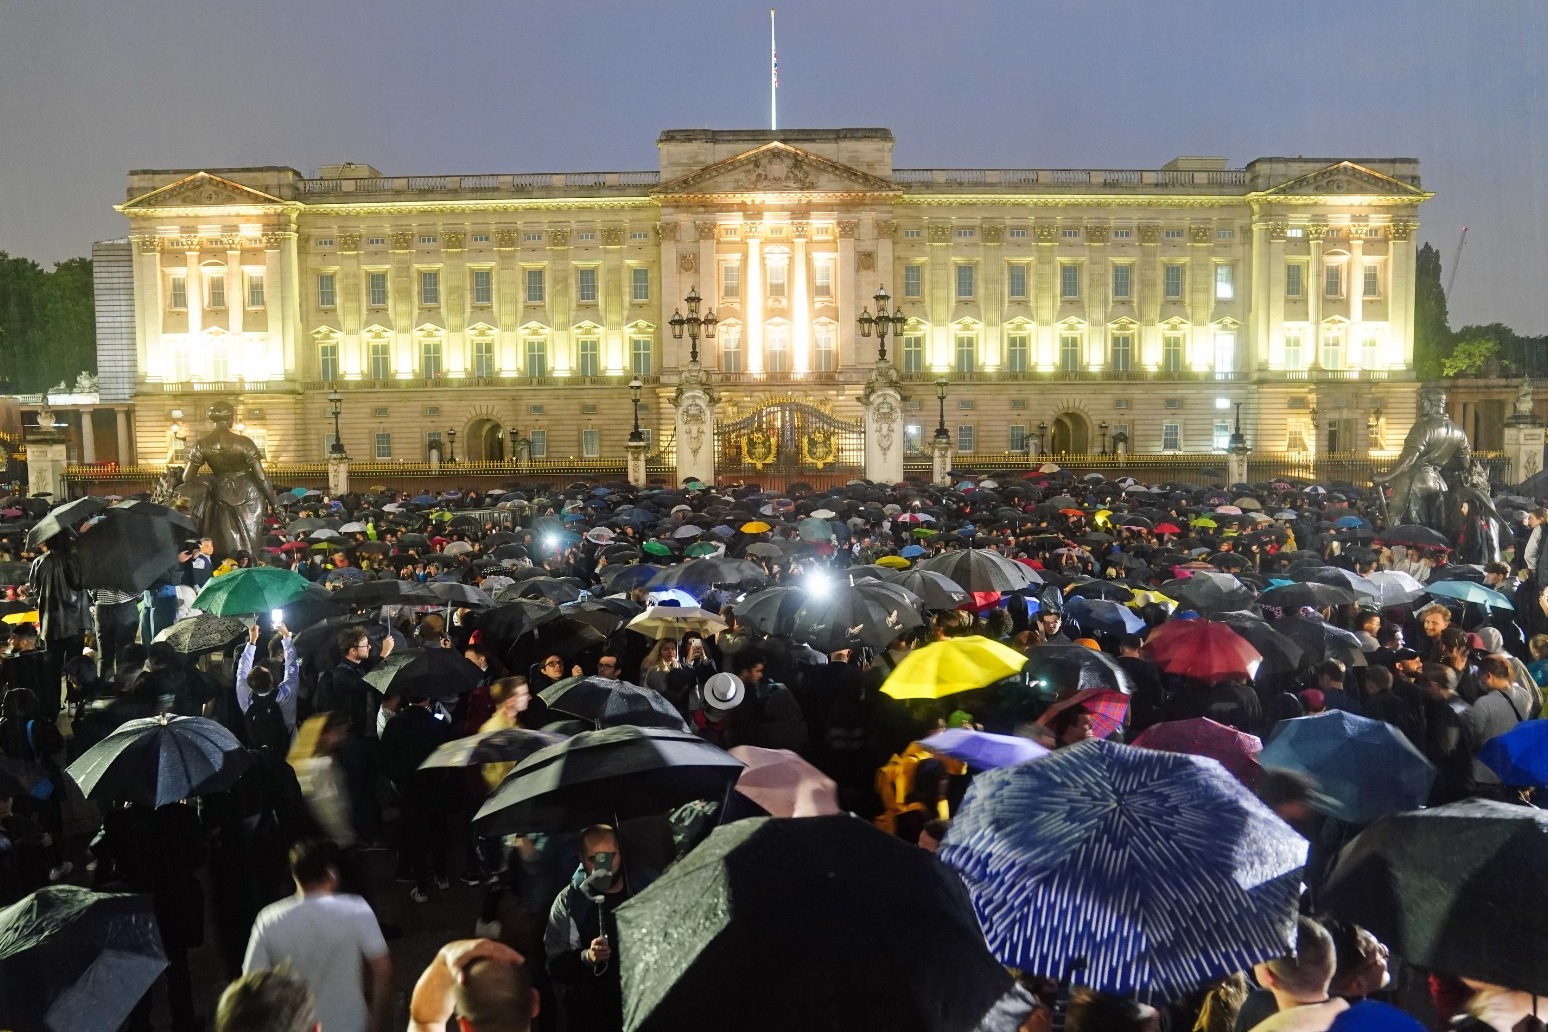 Outpouring of love and grief from public at the gates of Buckingham Palace 